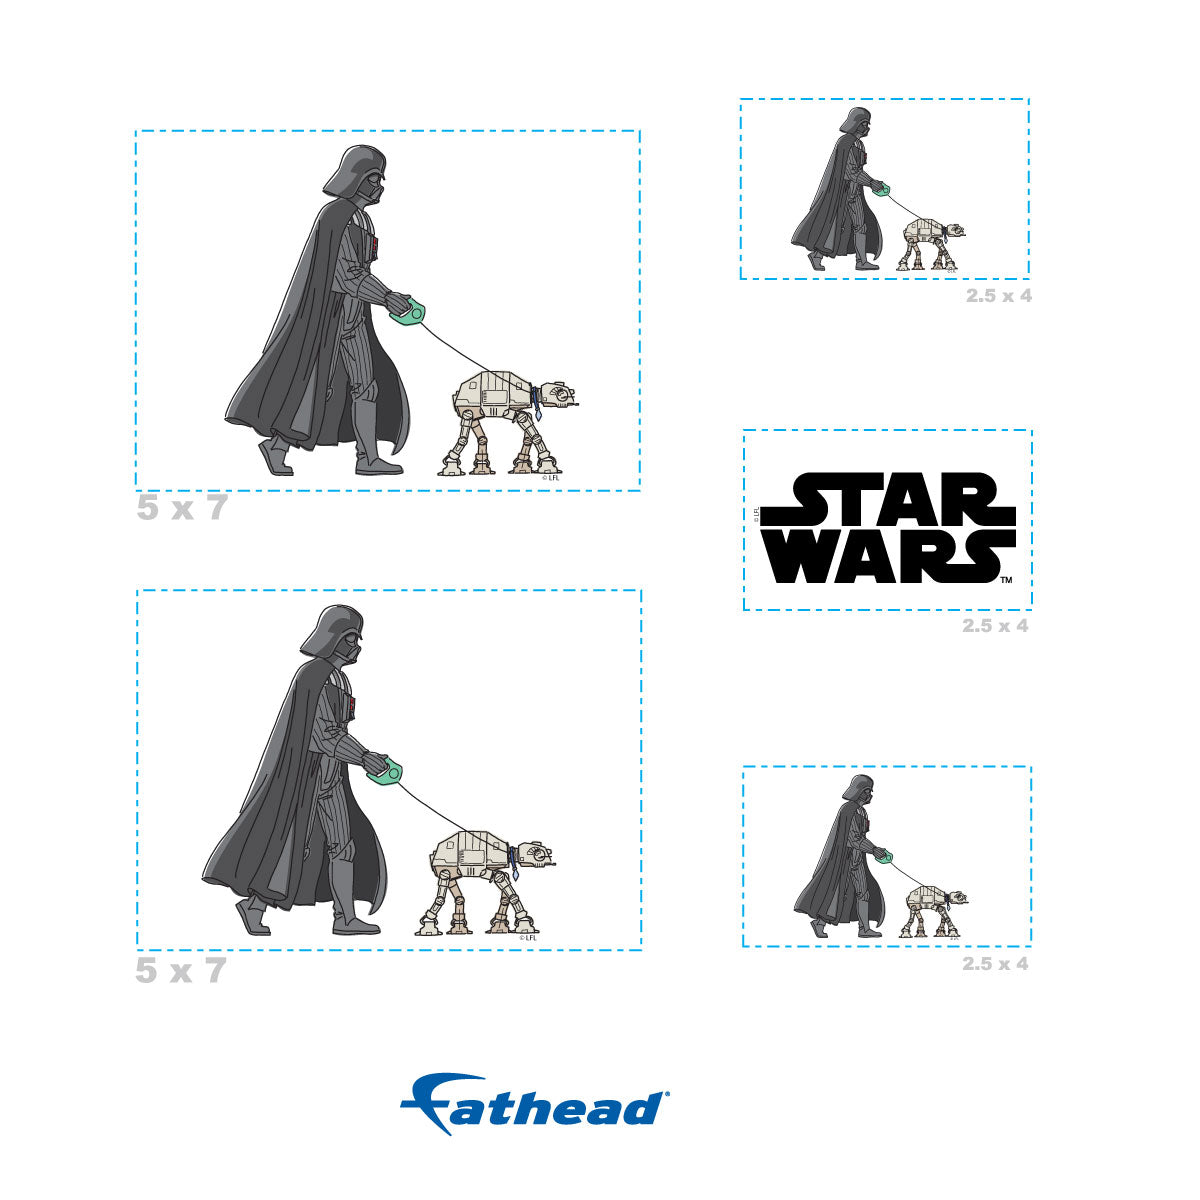 Darth Vader Walking The Dog Minis        - Officially Licensed Star Wars Removable     Adhesive Decal